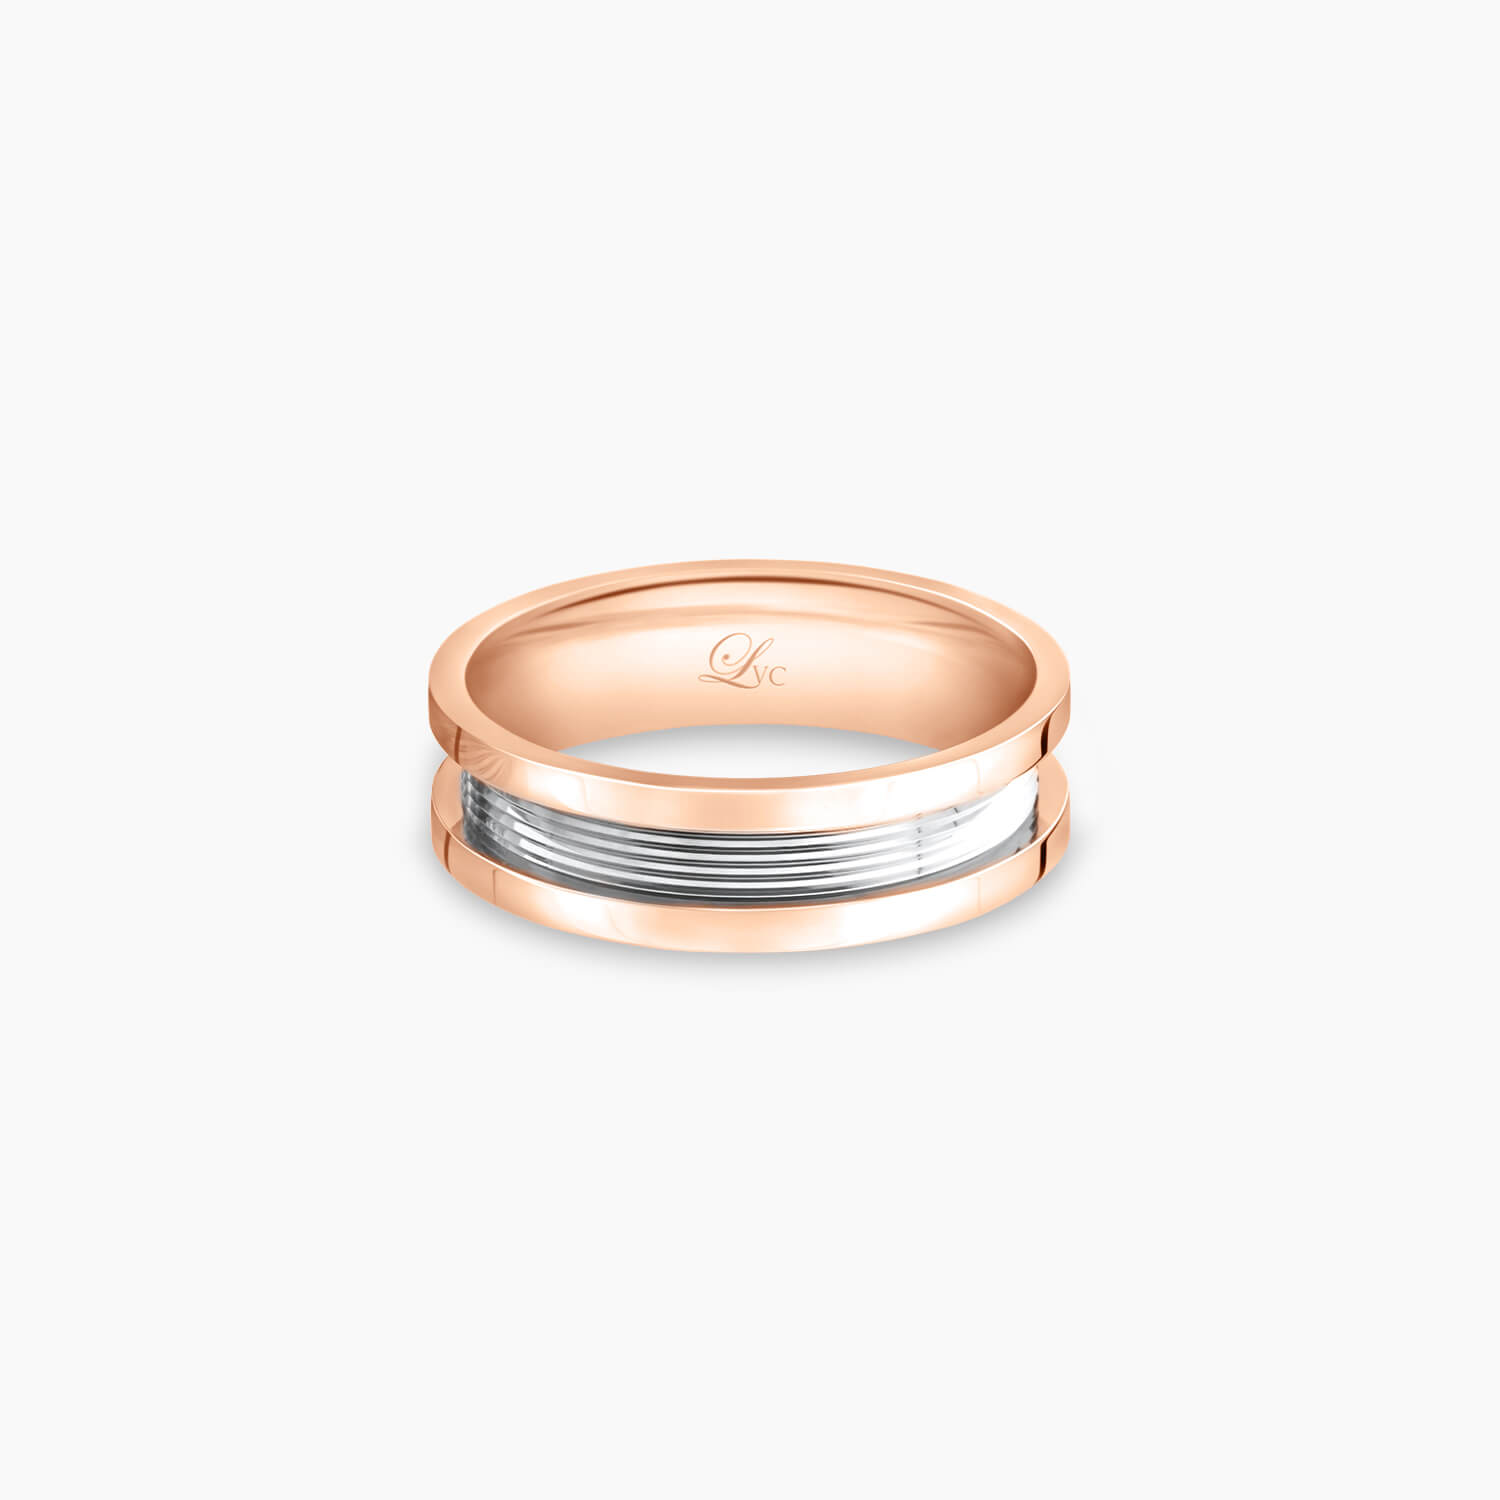 LVC PROMISE PURE WEDDING BAND IN ROSE GOLD a wedding band for men in rose gold